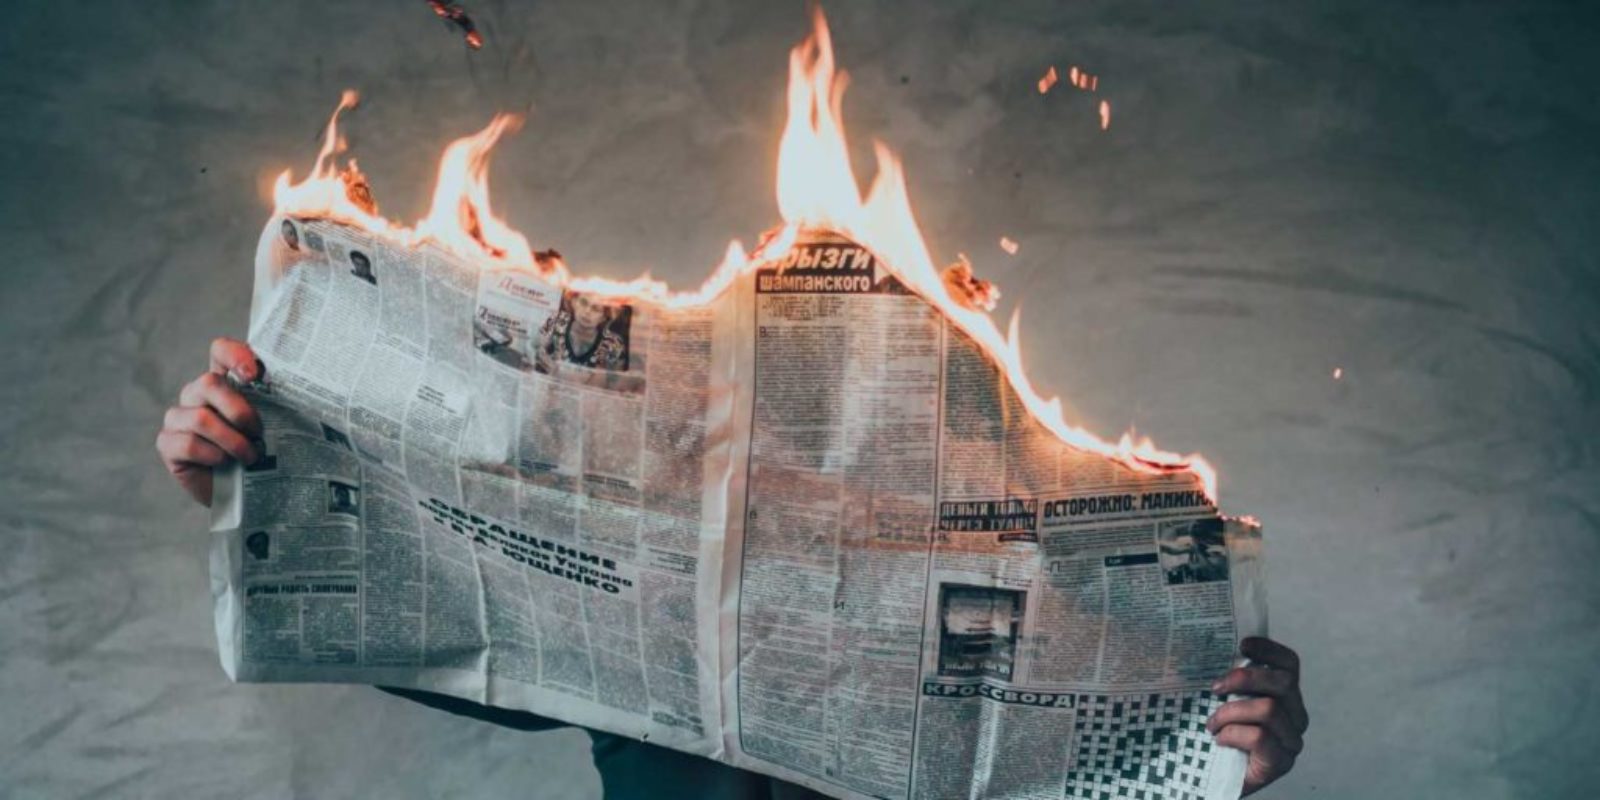 Newspaper burning while a person is reading it.